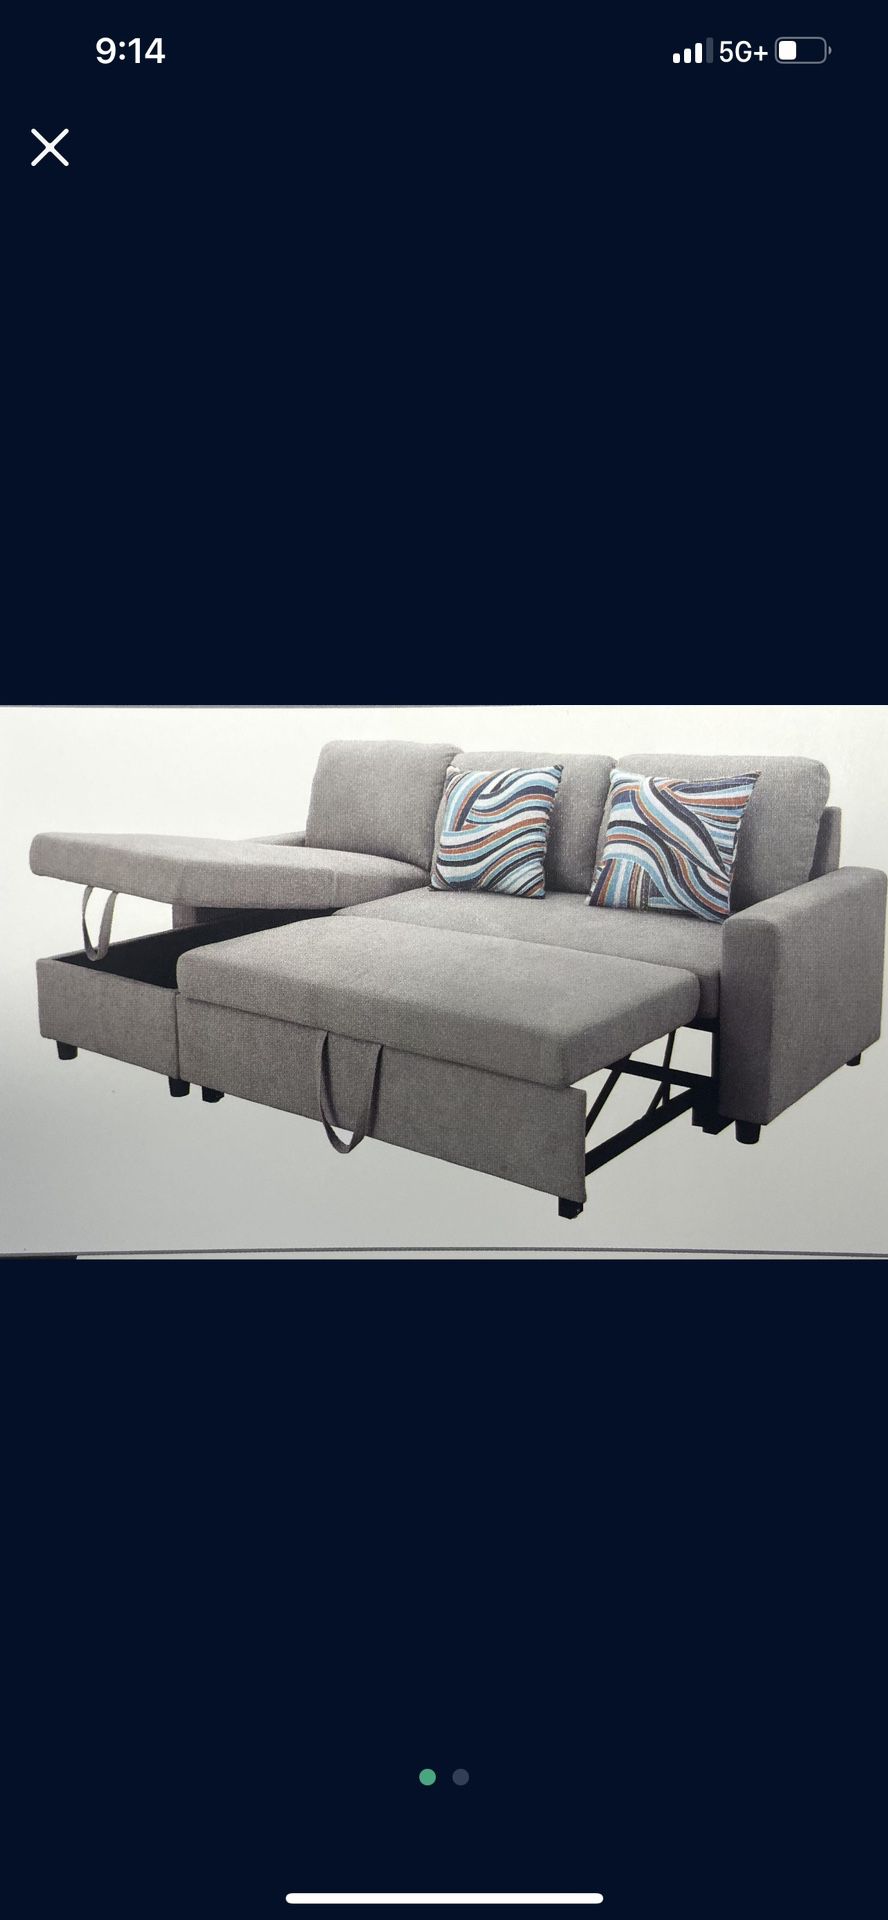 Grey Soft And Comfy Sectional Sleeper Couch With Storage Ottoman 